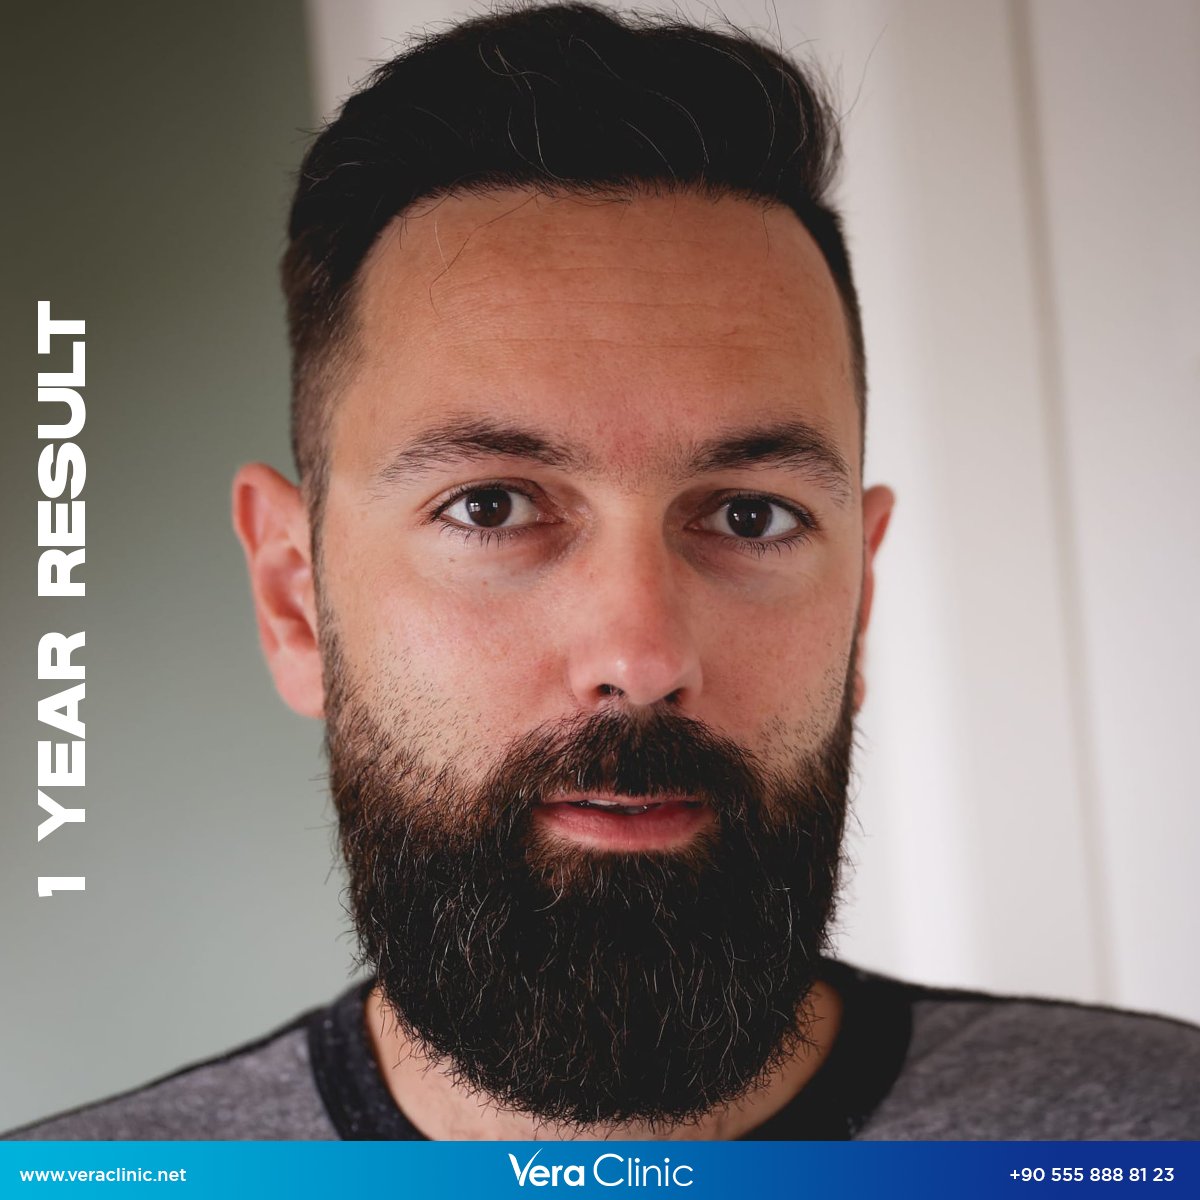 Witness the remarkable results of a hair transplant journey, showcasing before and after photos taken just one year apart.📸 Get a free consultation: 📲 +90 555 888 81 23 👉veraclinic.net #hairtransplant #hairtransplantturkey